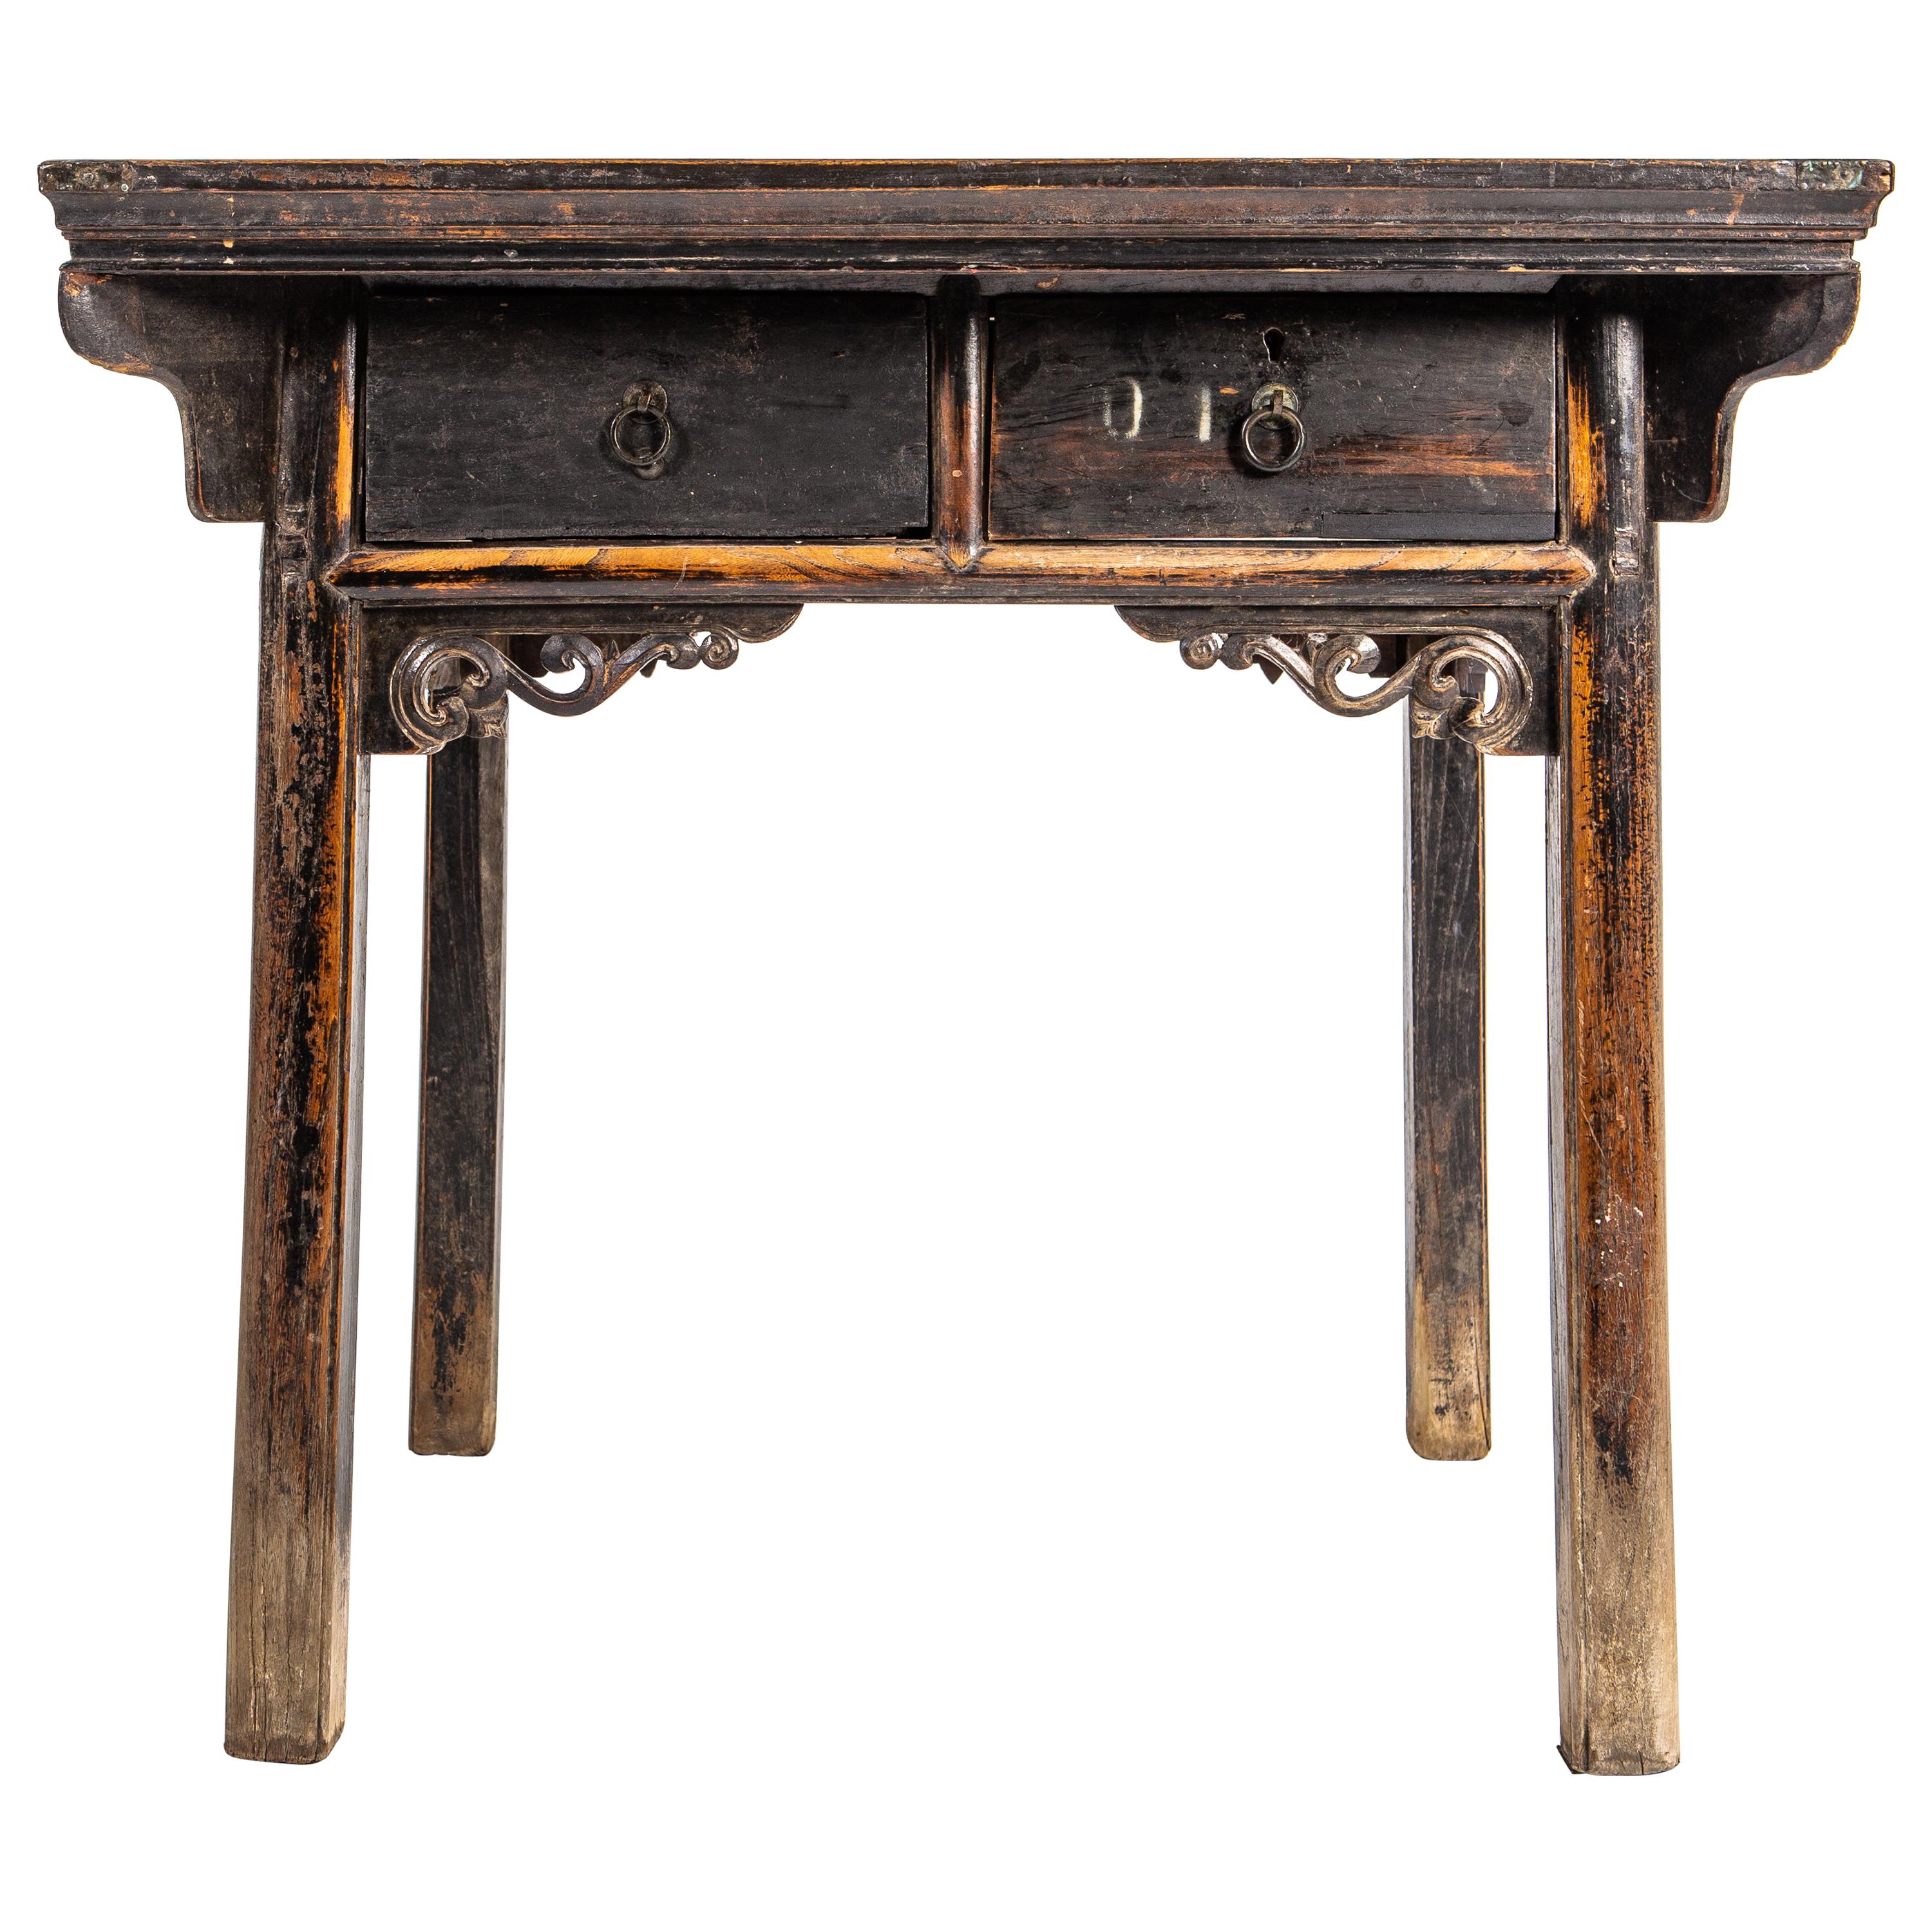 Late Qing Dynasty Square Table with Two Drawers